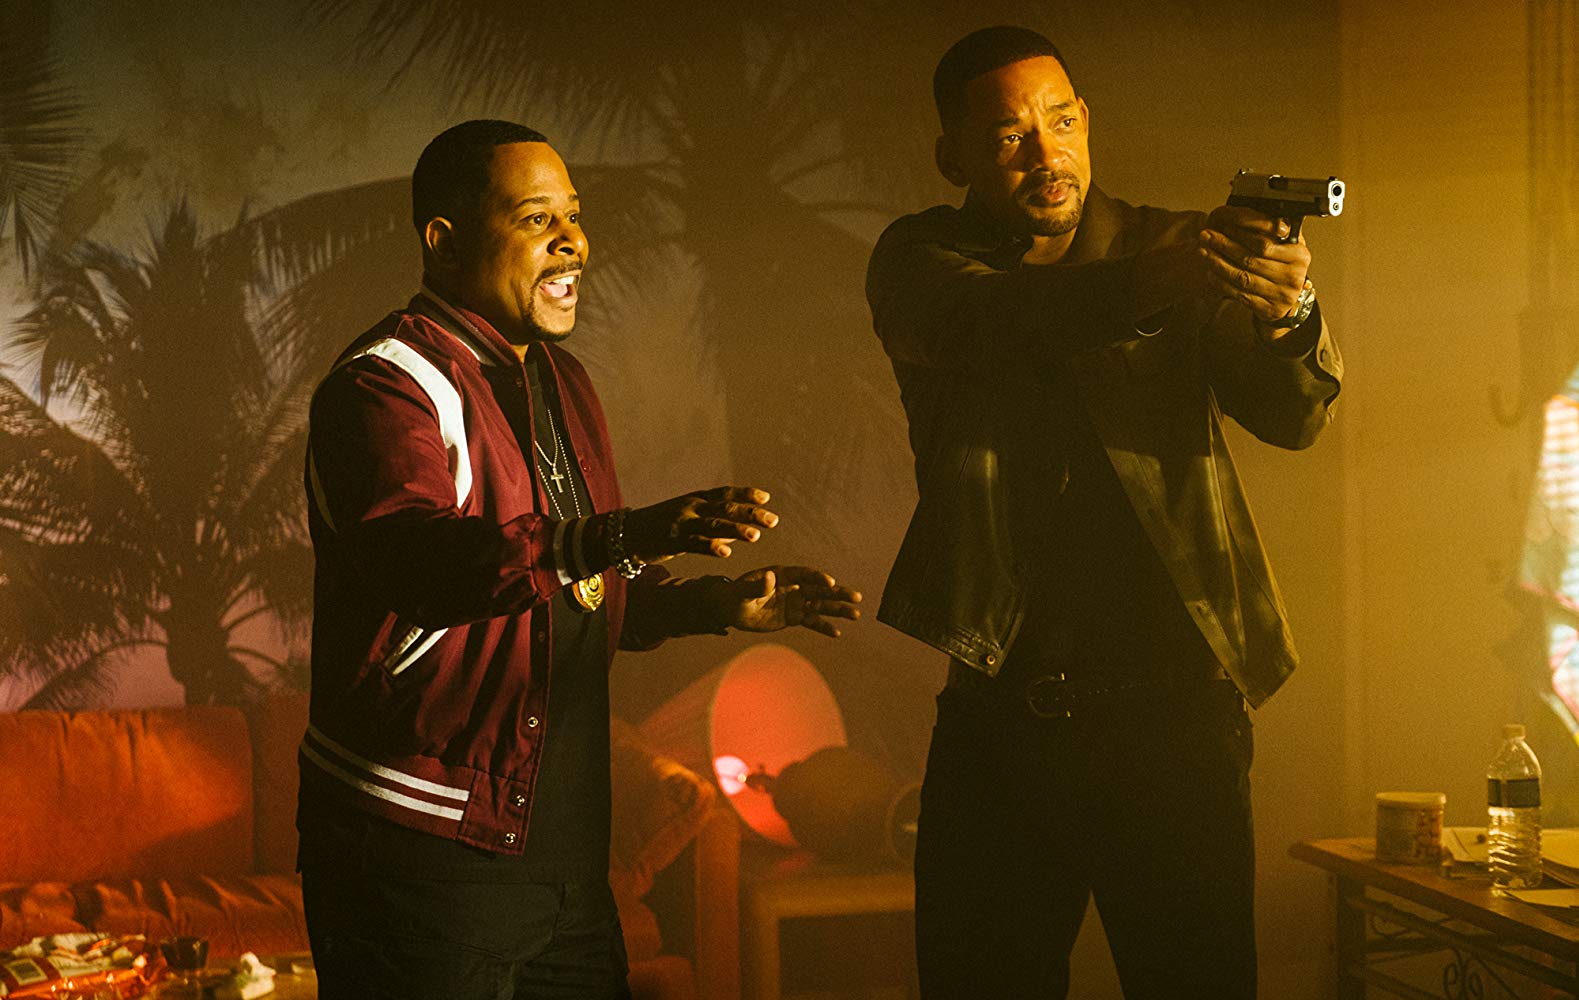 Bad Boys for Life breathes new life into the franchise